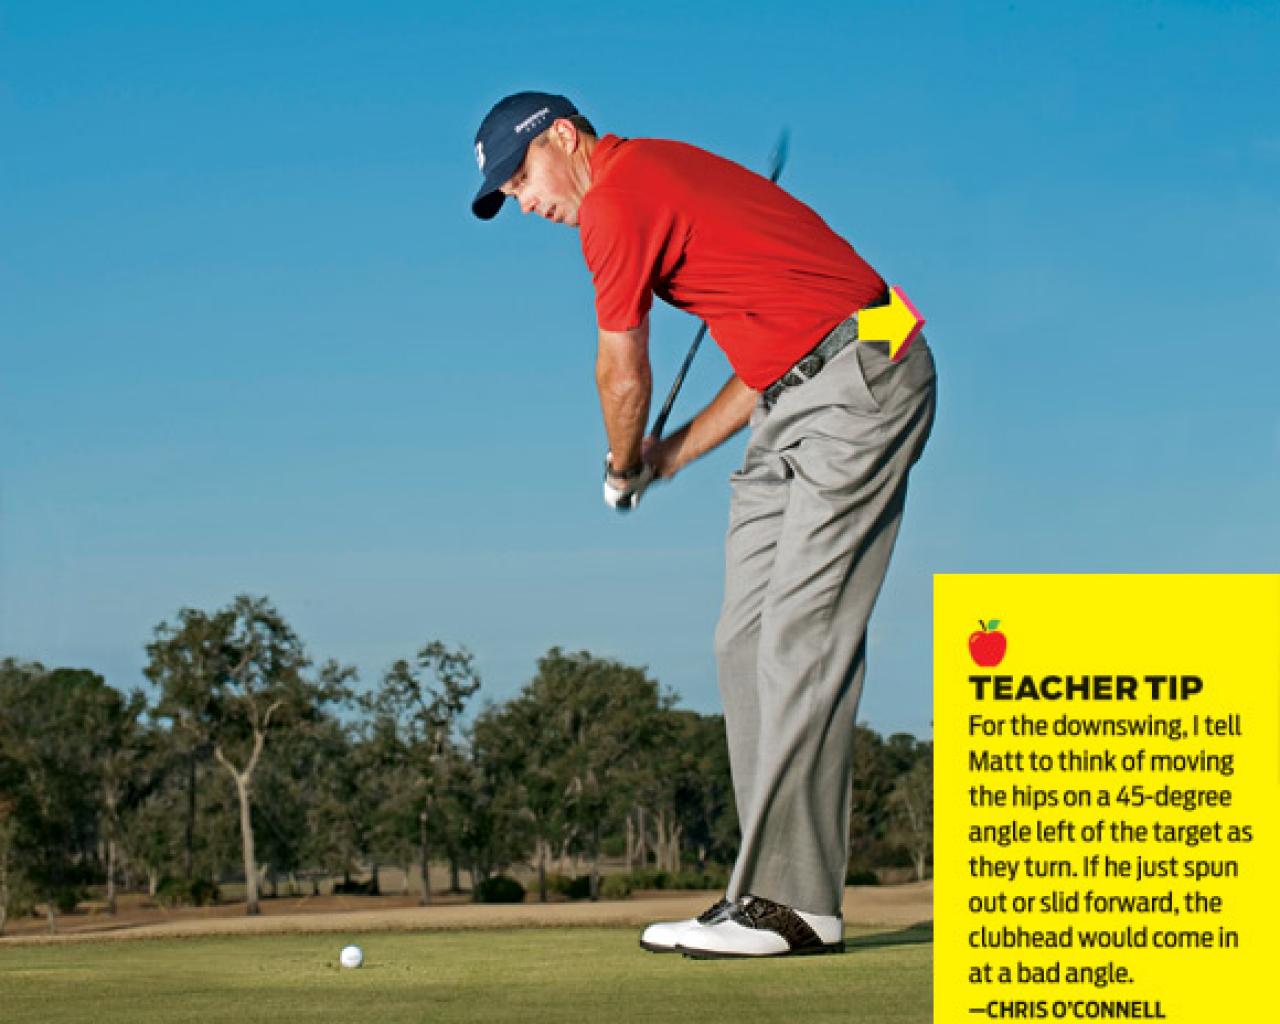 How To Make Your Swing Repeat: Matt Kuchar | How To | Golf Digest